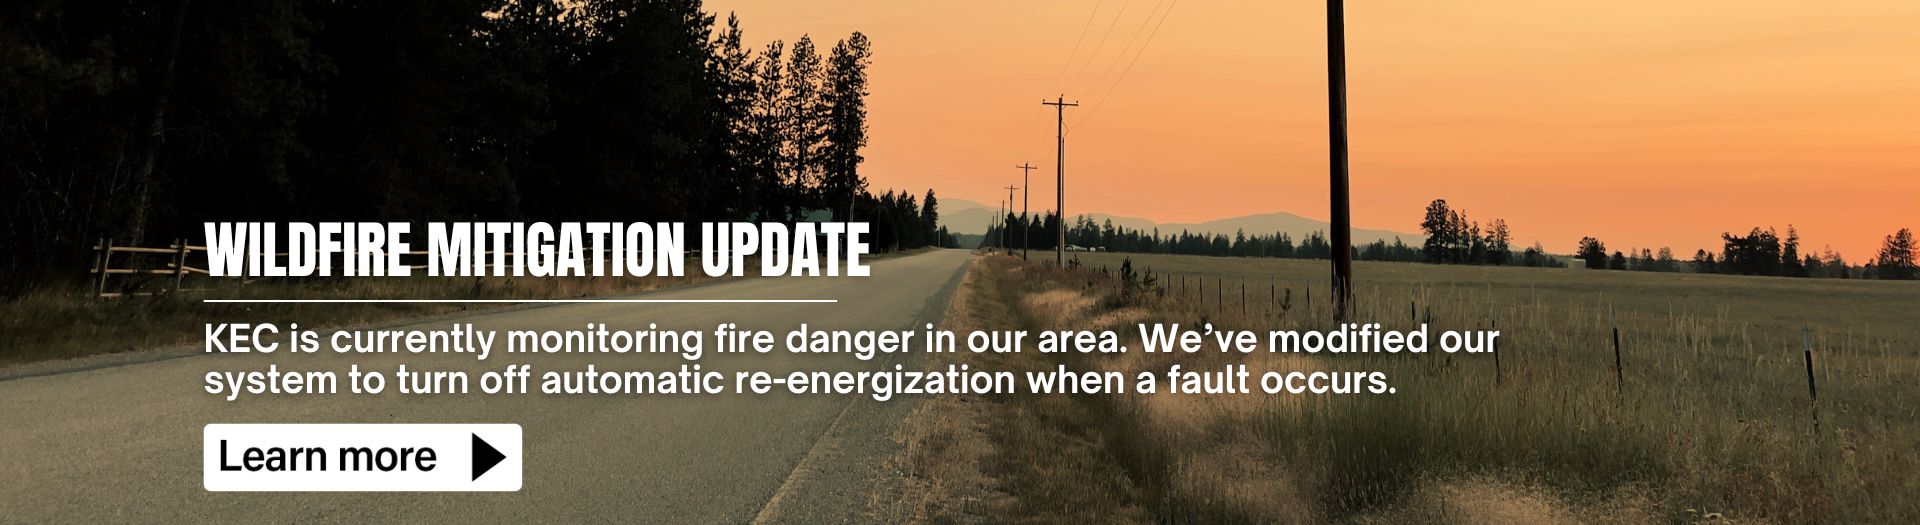 Wildfire Mitigation Update: KEC is currently monitoring fire danger in our area. We’ve modified our system to turn off automatic re-energization when a fault occurs. Learn More